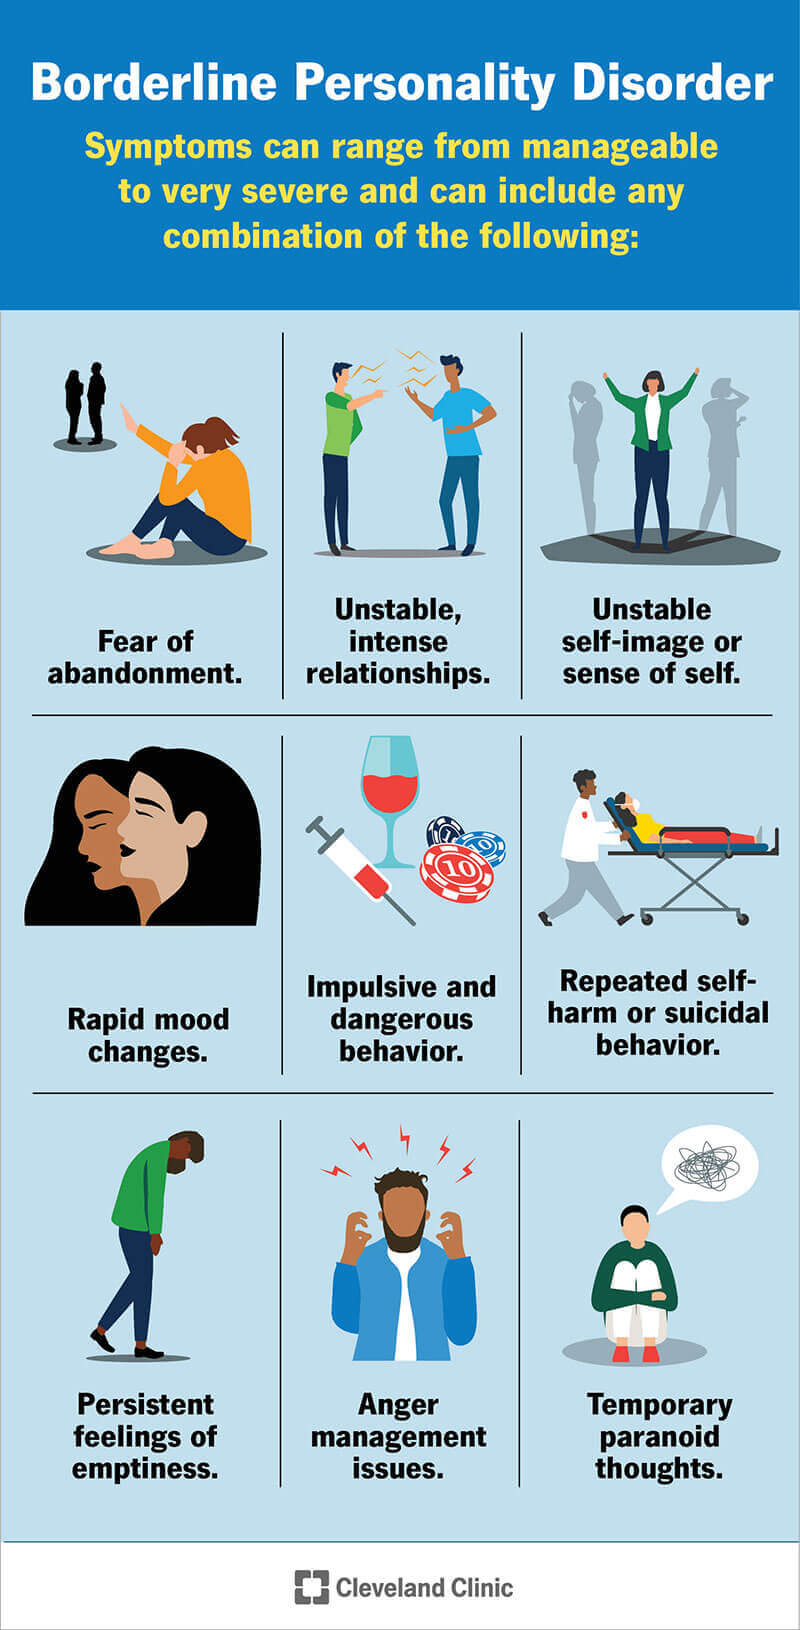 Signs of borderline personality disorder include fear of abandonment, unstable sense of self & anger management issues.